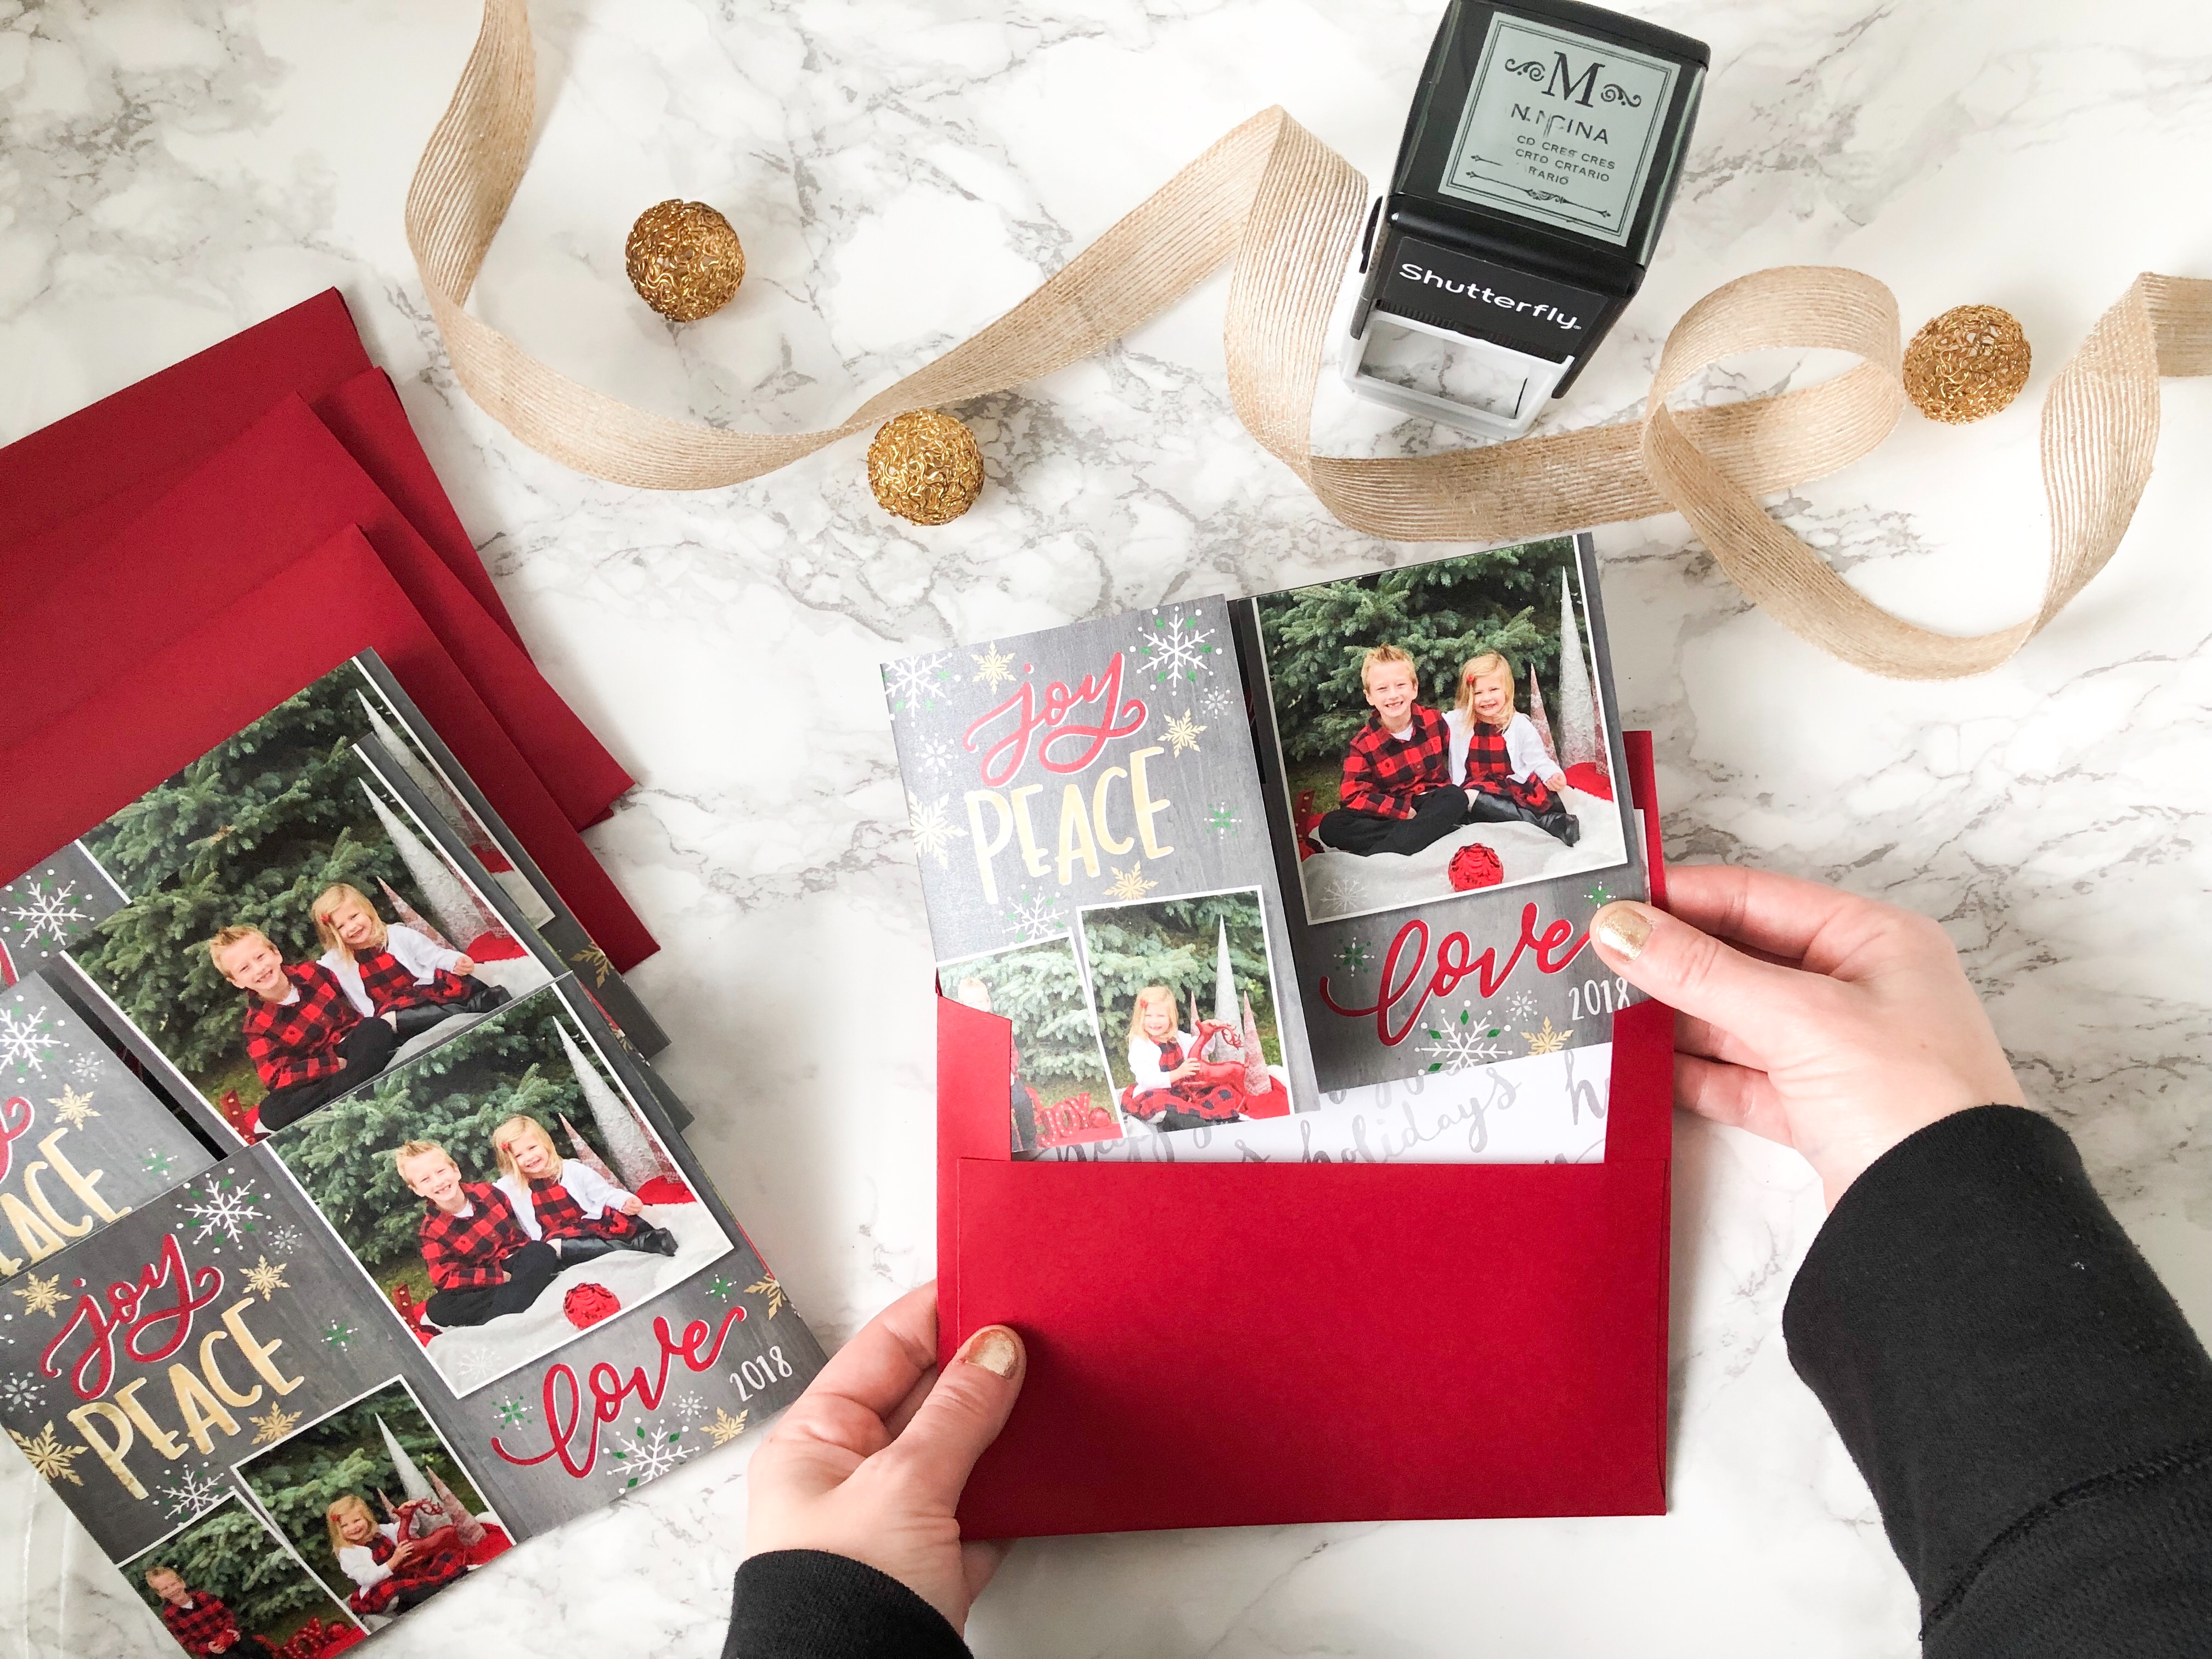 Our 2018 Christmas Cards from Shutterfly